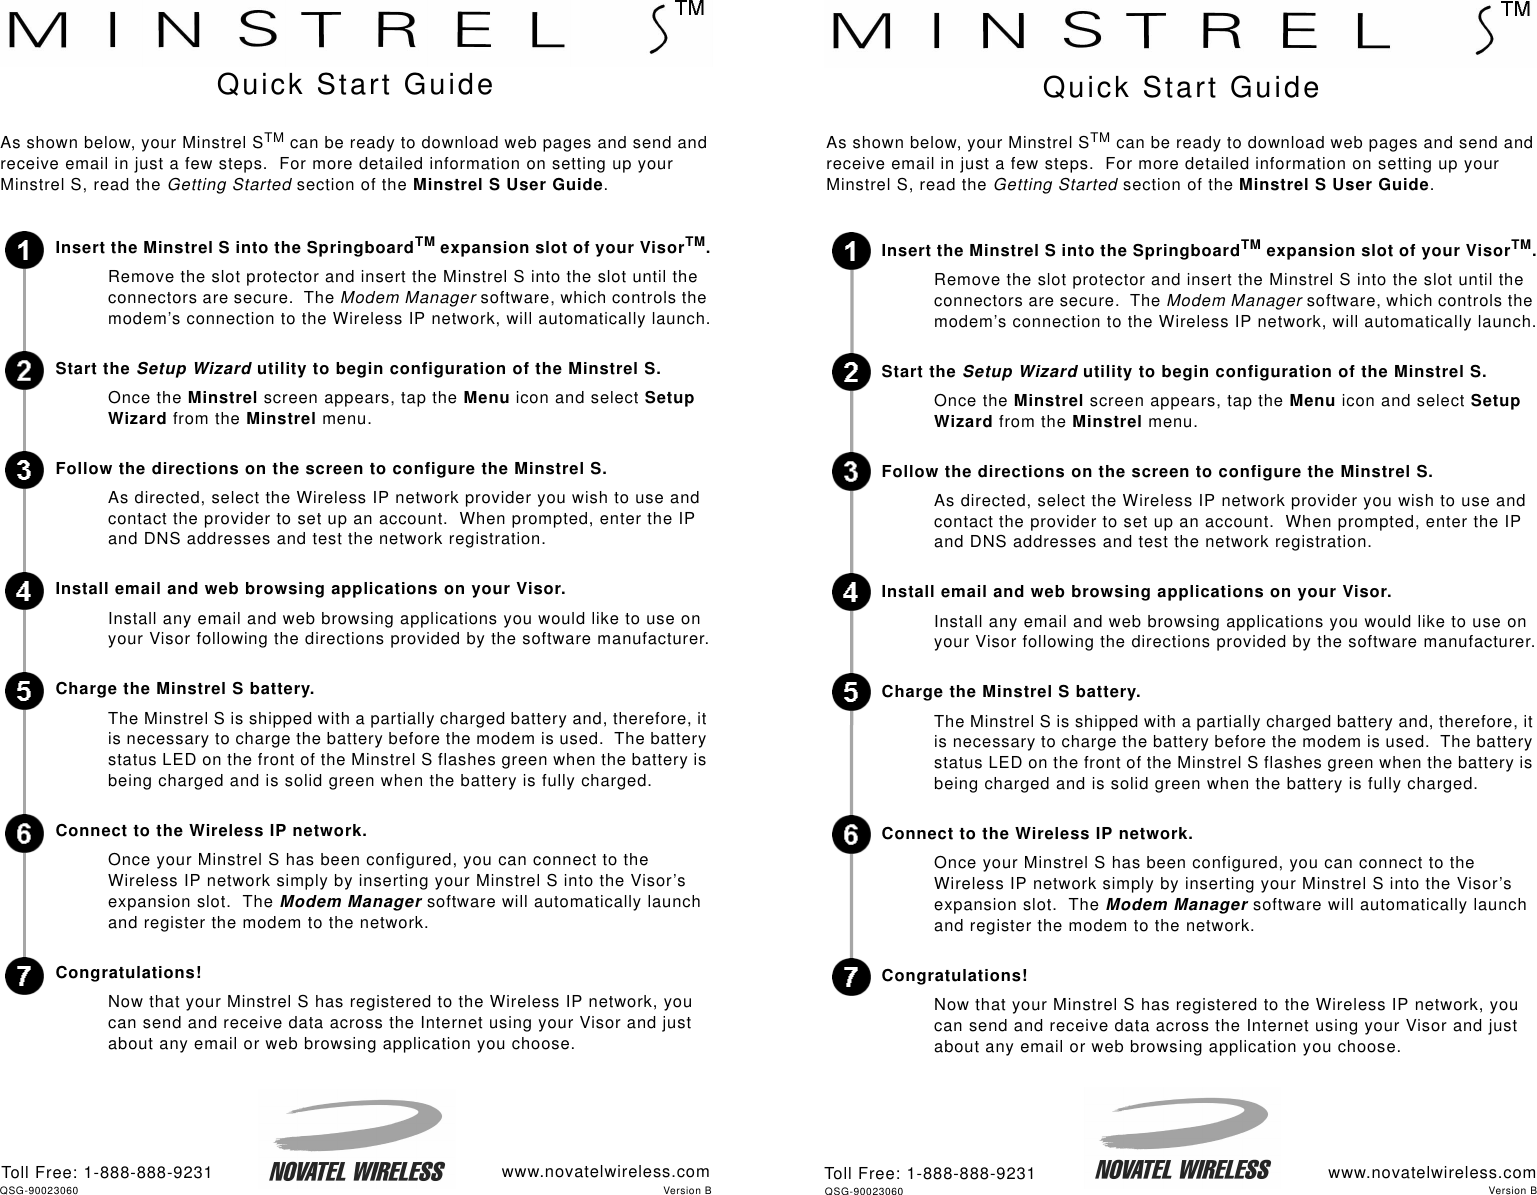 www.novatelwireless.comToll Free: 1-888-888-9231As shown below, your Minstrel STM can be ready to download web pages and send and receive email in just a few steps.  For more detailed information on setting up your Minstrel S, read the Getting Started section of the Minstrel S User Guide.Insert the Minstrel S into the SpringboardTM expansion slot of your VisorTM.Remove the slot protector and insert the Minstrel S into the slot until the connectors are secure.  The Modem Manager software, which controls the modem’s connection to the Wireless IP network, will automatically launch.Start the Setup Wizard utility to begin configuration of the Minstrel S.Once the Minstrel screen appears, tap the Menu icon and select Setup Wizard from the Minstrel menu. Follow the directions on the screen to configure the Minstrel S.As directed, select the Wireless IP network provider you wish to use and contact the provider to set up an account.  When prompted, enter the IP and DNS addresses and test the network registration.Install email and web browsing applications on your Visor.Install any email and web browsing applications you would like to use on your Visor following the directions provided by the software manufacturer.Charge the Minstrel S battery.The Minstrel S is shipped with a partially charged battery and, therefore, it is necessary to charge the battery before the modem is used.  The battery status LED on the front of the Minstrel S flashes green when the battery is being charged and is solid green when the battery is fully charged.  Connect to the Wireless IP network.Once your Minstrel S has been configured, you can connect to the Wireless IP network simply by inserting your Minstrel S into the Visor’s expansion slot.  The Modem Manager software will automatically launch and register the modem to the network.  Congratulations!Now that your Minstrel S has registered to the Wireless IP network, you can send and receive data across the Internet using your Visor and just about any email or web browsing application you choose.  Quick Start GuideAs shown below, your Minstrel STM can be ready to download web pages and send and receive email in just a few steps.  For more detailed information on setting up your Minstrel S, read the Getting Started section of the Minstrel S User Guide.Insert the Minstrel S into the SpringboardTM expansion slot of your VisorTM.Remove the slot protector and insert the Minstrel S into the slot until the connectors are secure.  The Modem Manager software, which controls the modem’s connection to the Wireless IP network, will automatically launch.Start the Setup Wizard utility to begin configuration of the Minstrel S.Once the Minstrel screen appears, tap the Menu icon and select Setup Wizard from the Minstrel menu. Follow the directions on the screen to configure the Minstrel S.As directed, select the Wireless IP network provider you wish to use and contact the provider to set up an account.  When prompted, enter the IP and DNS addresses and test the network registration.Install email and web browsing applications on your Visor.Install any email and web browsing applications you would like to use on your Visor following the directions provided by the software manufacturer.Charge the Minstrel S battery.The Minstrel S is shipped with a partially charged battery and, therefore, it is necessary to charge the battery before the modem is used.  The battery status LED on the front of the Minstrel S flashes green when the battery is being charged and is solid green when the battery is fully charged.  Connect to the Wireless IP network.Once your Minstrel S has been configured, you can connect to the Wireless IP network simply by inserting your Minstrel S into the Visor’s expansion slot.  The Modem Manager software will automatically launch and register the modem to the network.  Congratulations!Now that your Minstrel S has registered to the Wireless IP network, you can send and receive data across the Internet using your Visor and just about any email or web browsing application you choose.  Quick Start Guidewww.novatelwireless.comToll Free: 1-888-888-9231QSG-90023060 Version BVersion BQSG-90023060